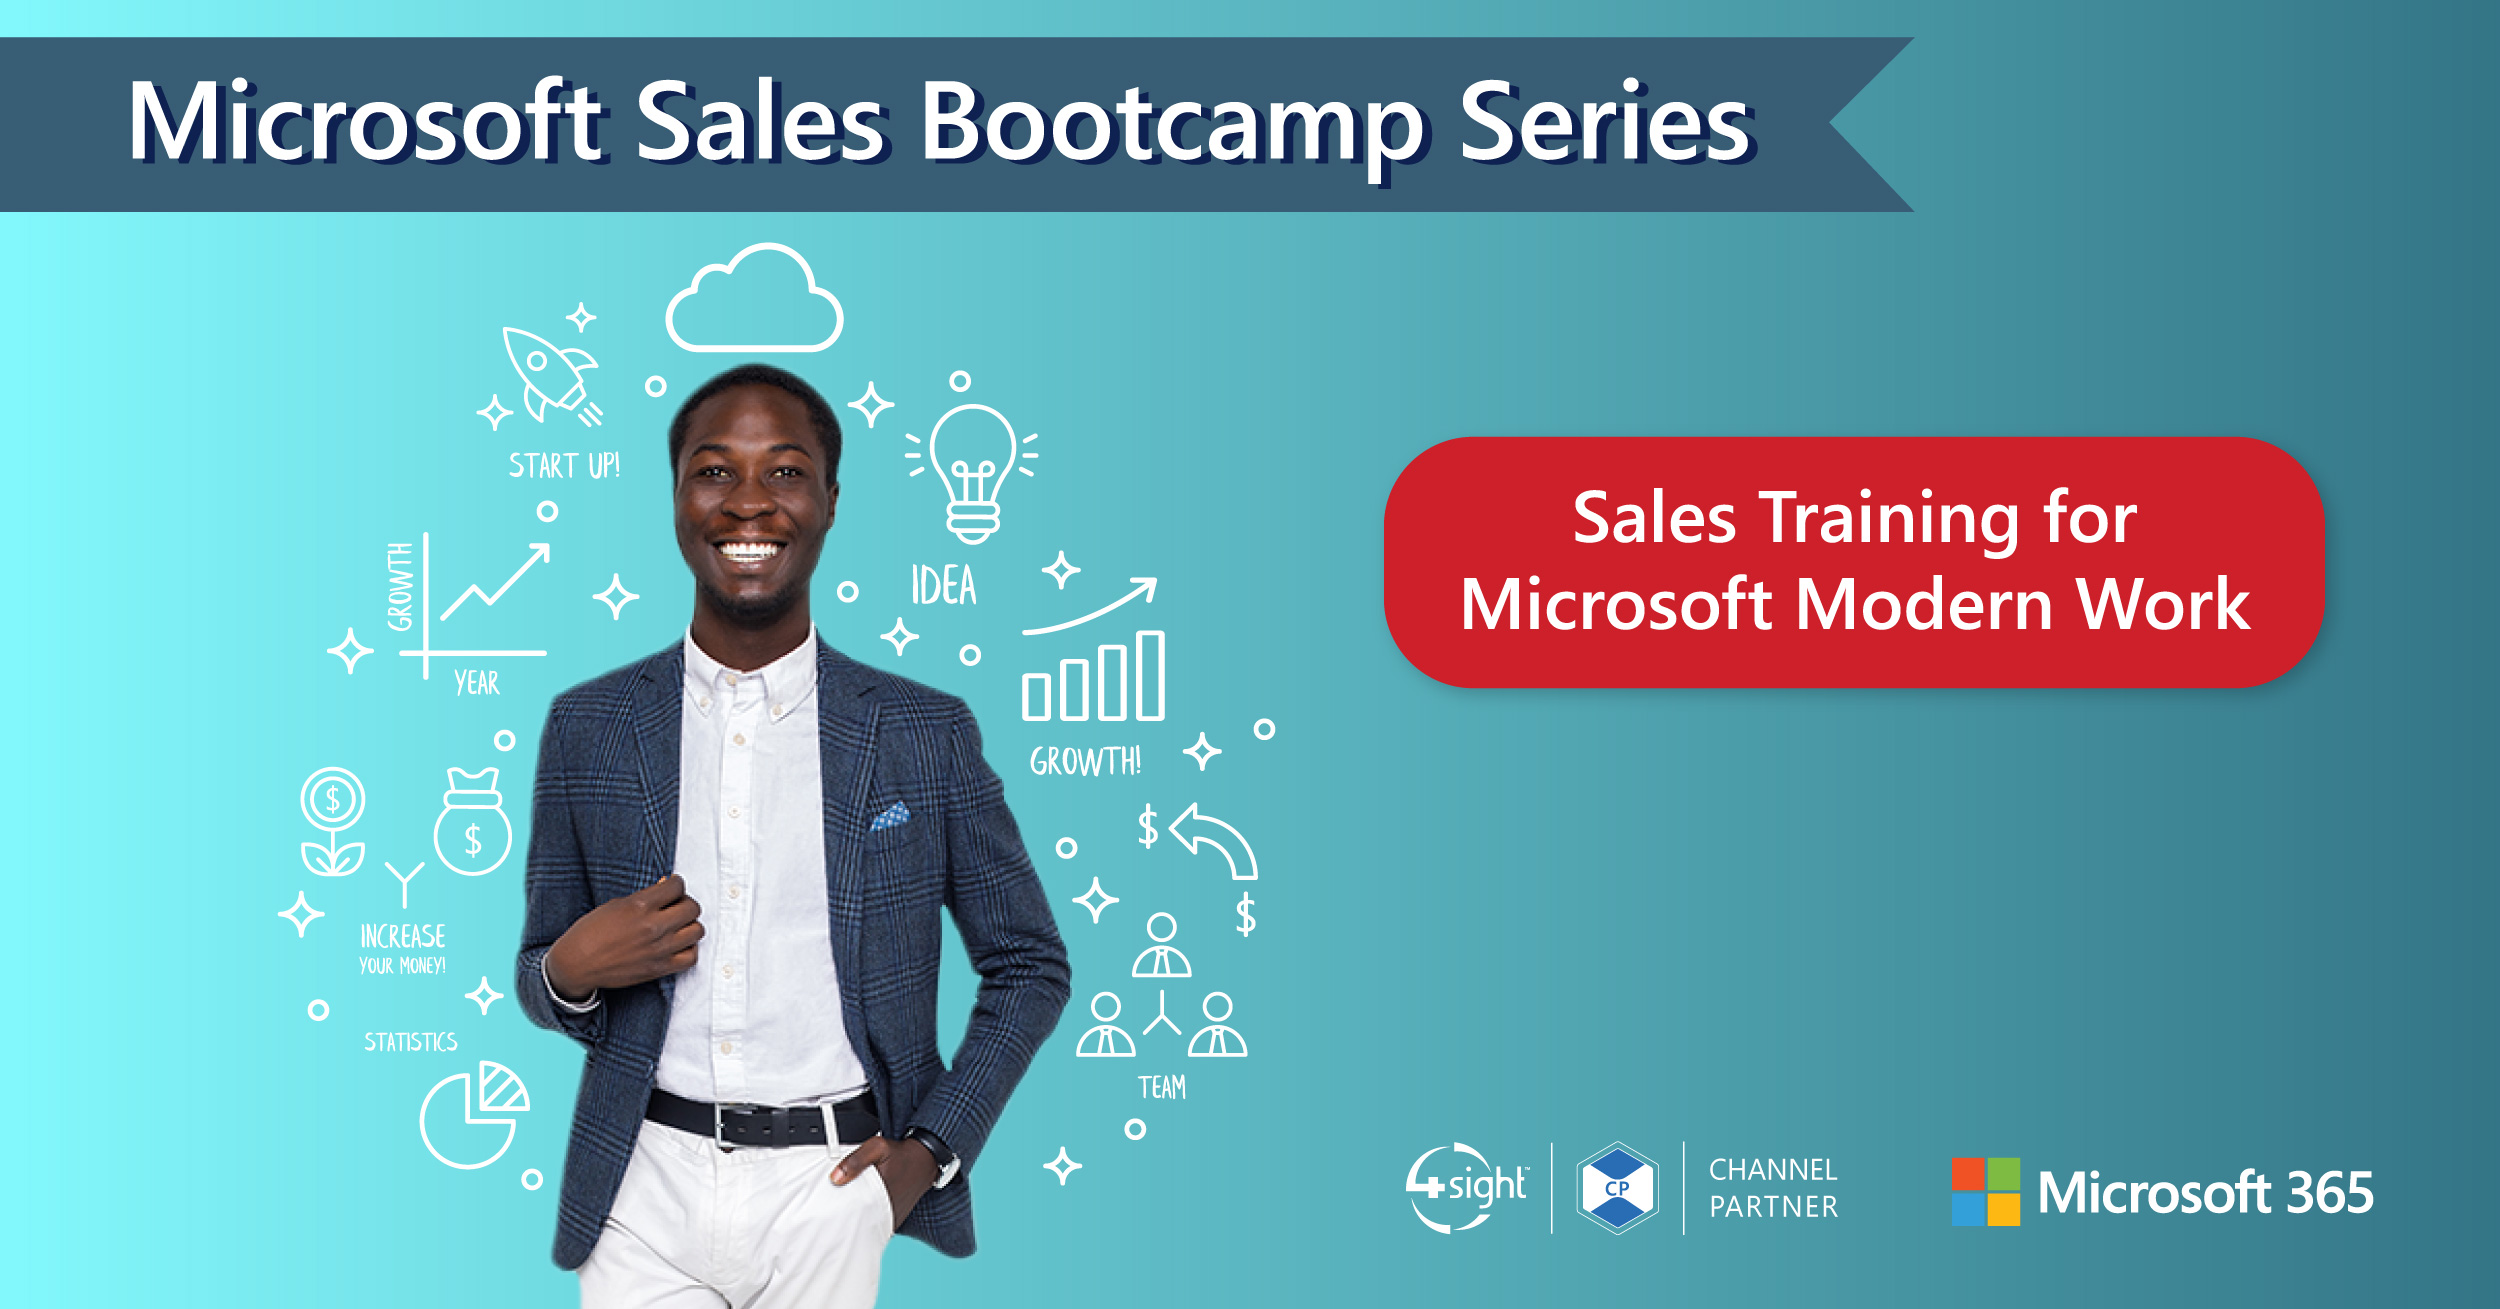 Microsoft sales bootcamp series banners 04